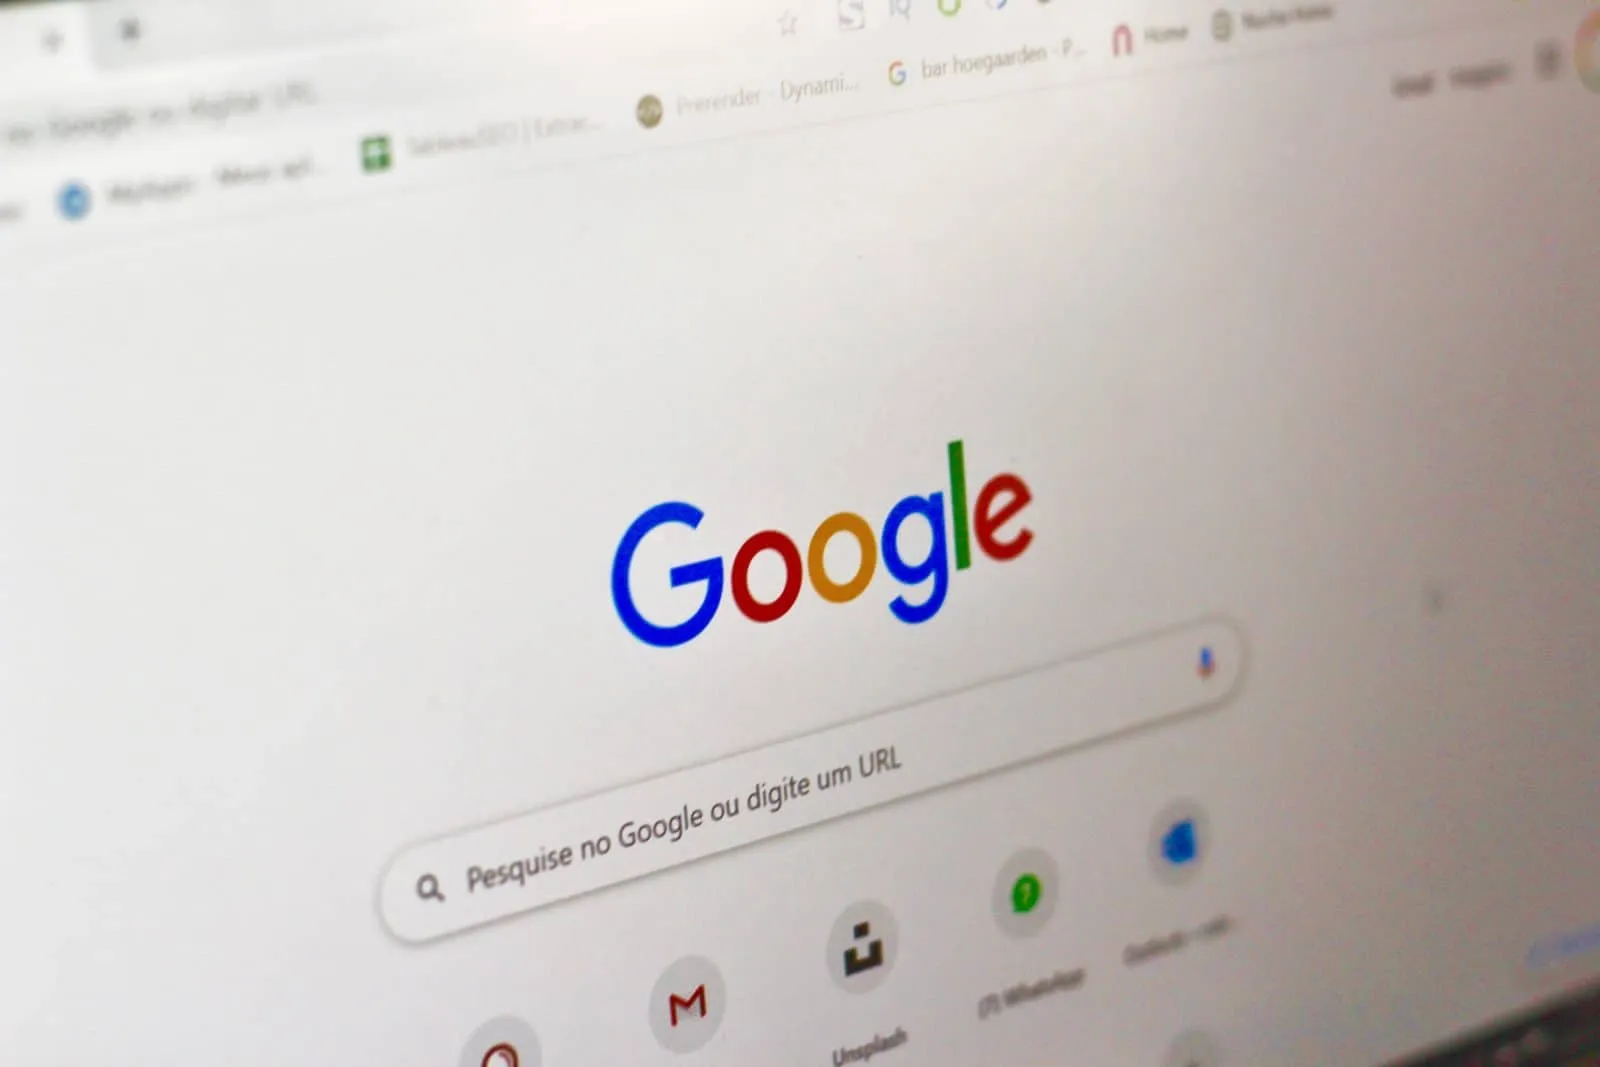 The Google logo is displayed on a computer screen.